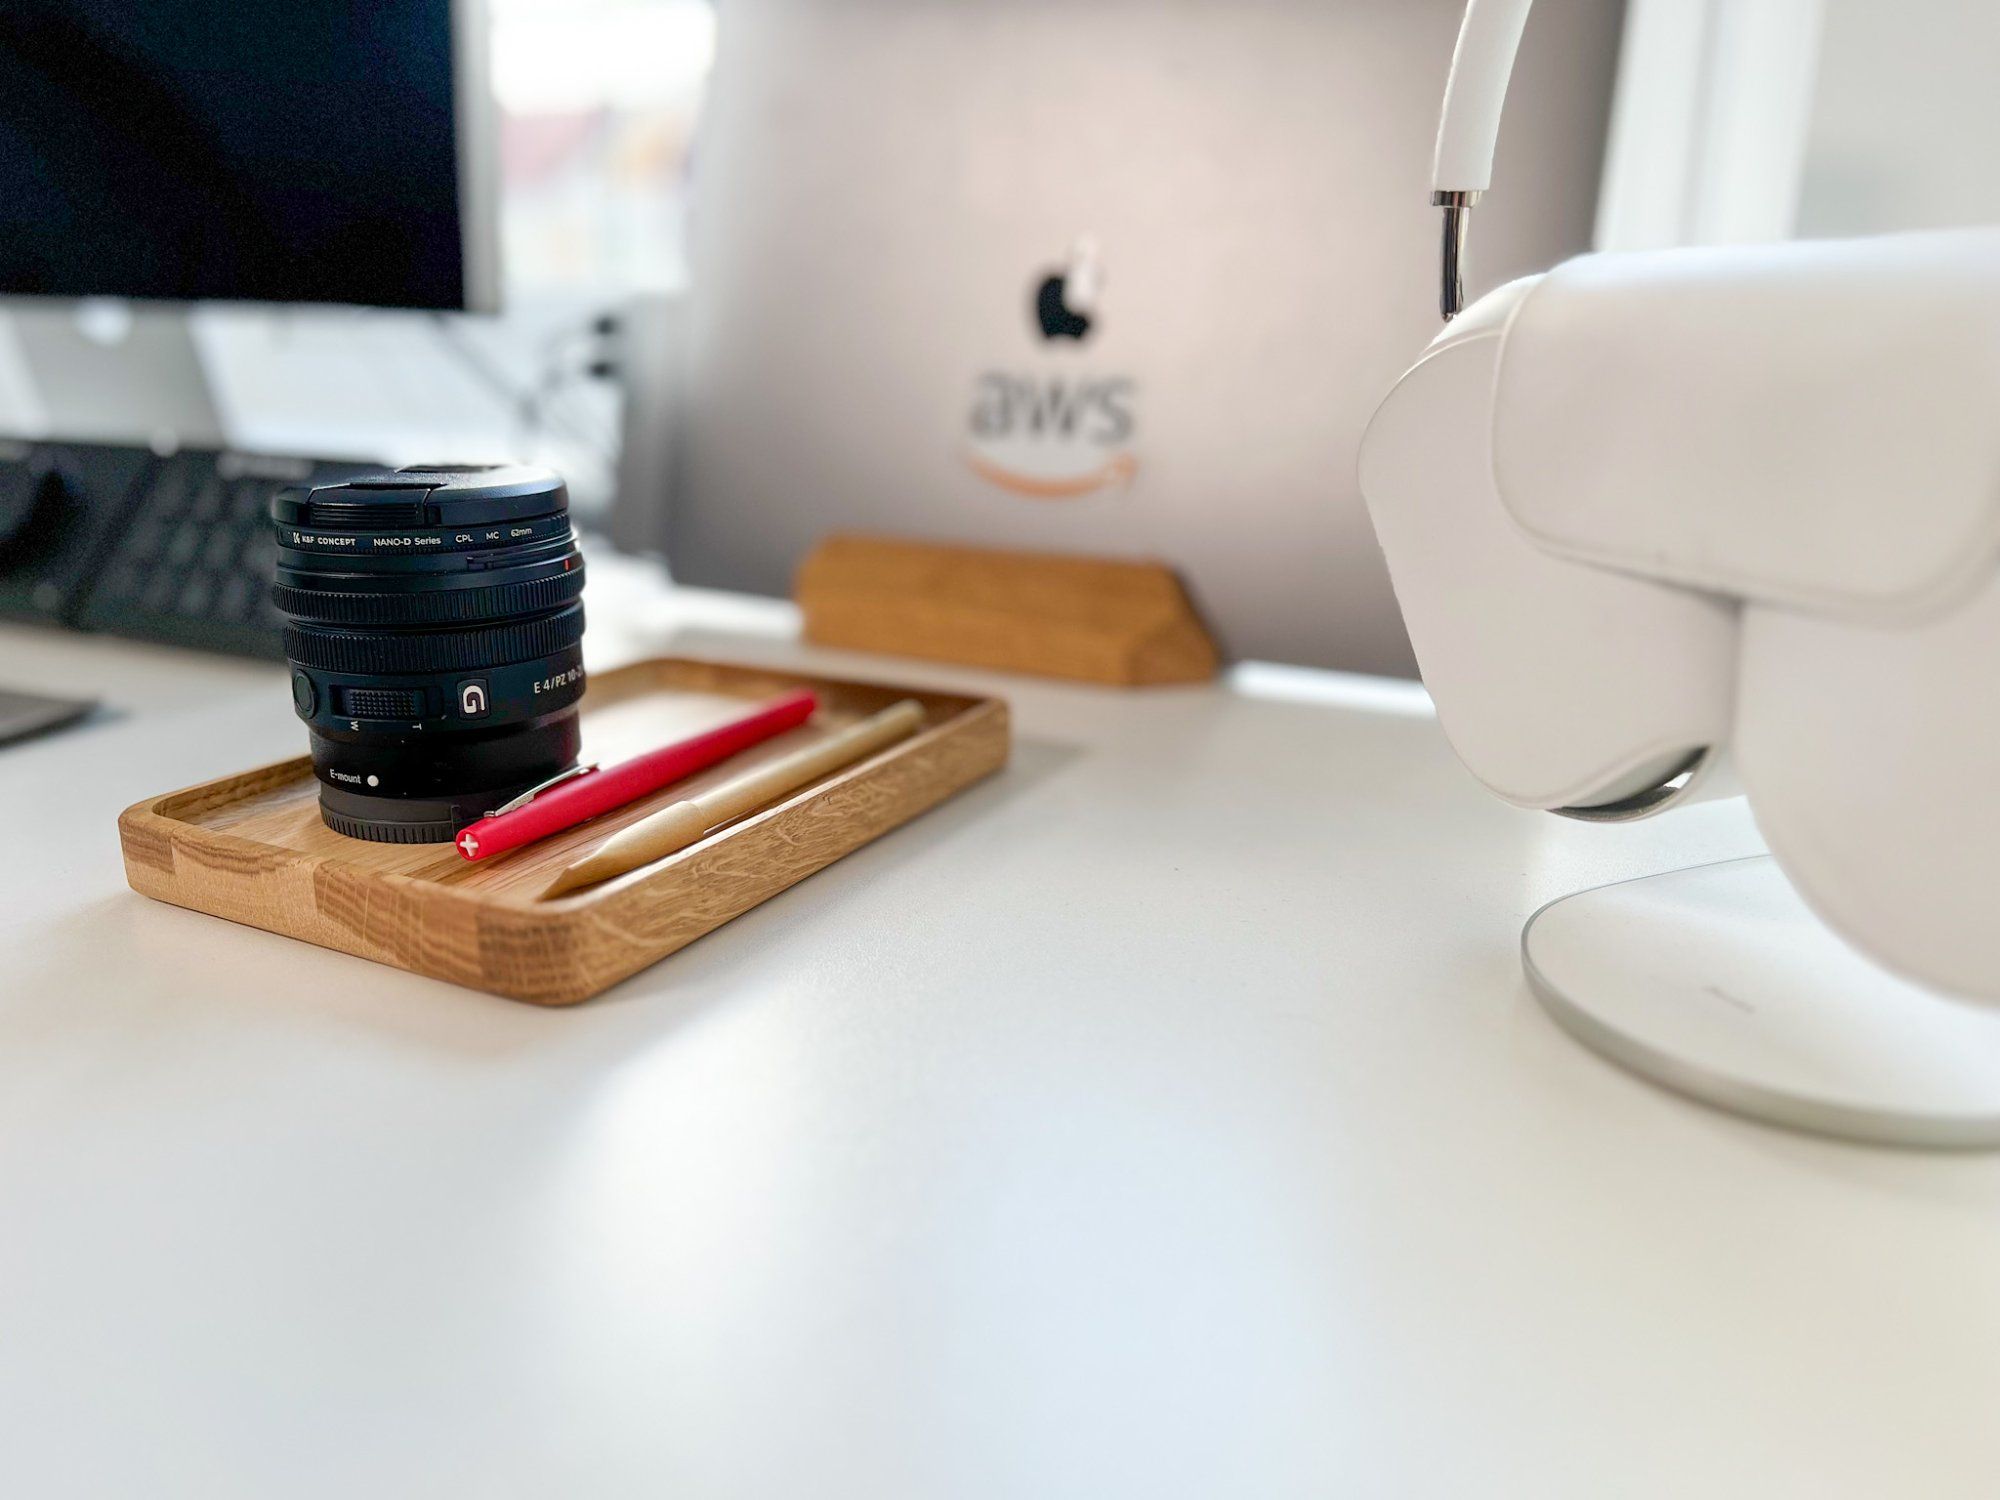 Photo of Luca Mezzalira’s desk setup, showing a stationery tray, a MacBook Pro on a stand, and the AirPods Max headphones